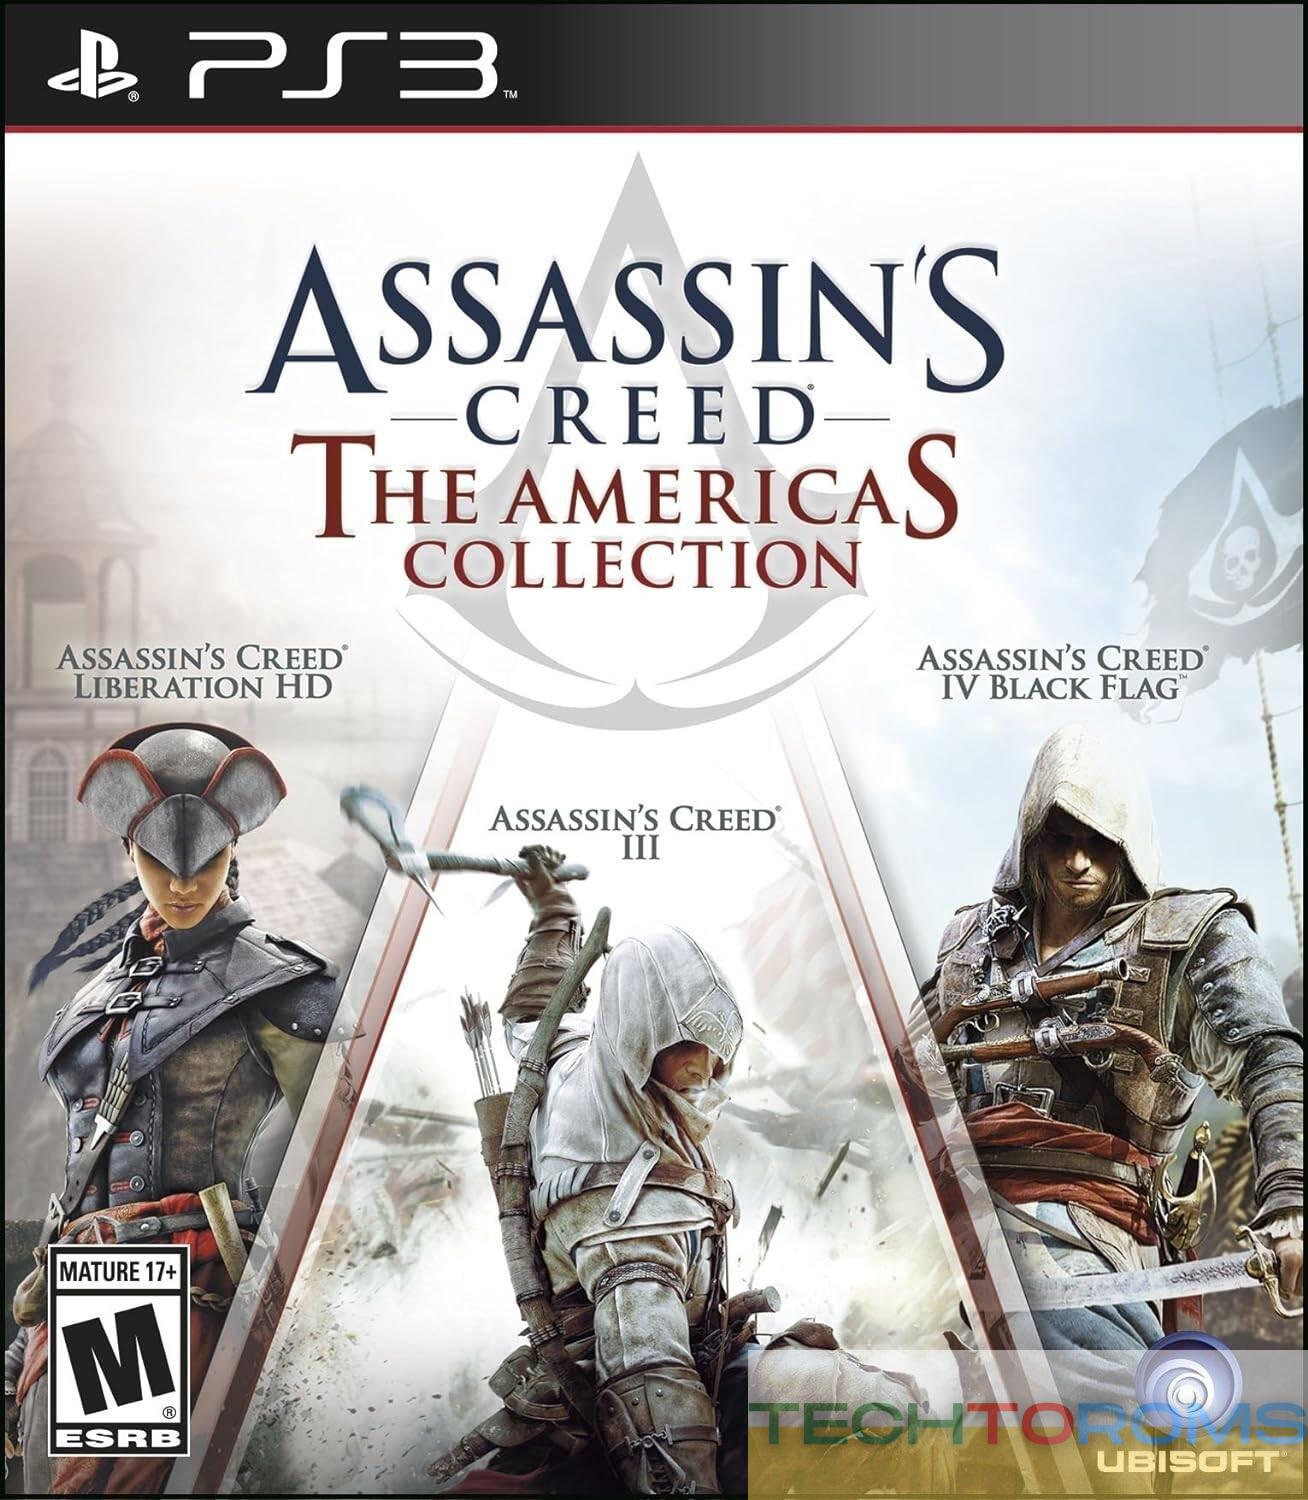 Assassin’s Creed: The Americas Collection